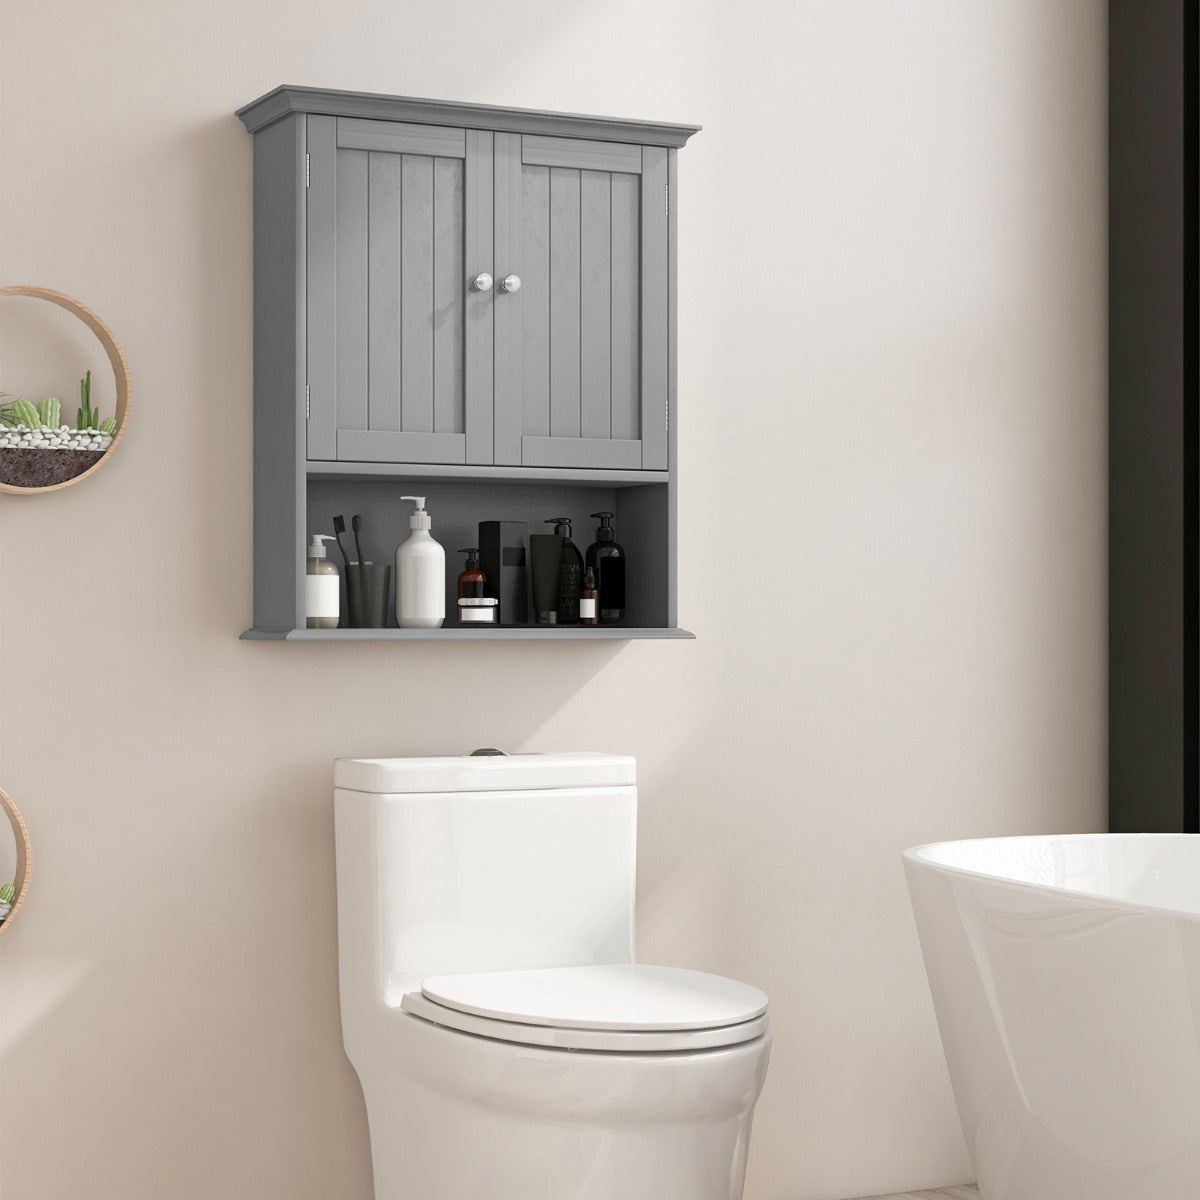 Wall Mount Bathroom Cabinet Storage Organizer with Doors and Shelves-Grey